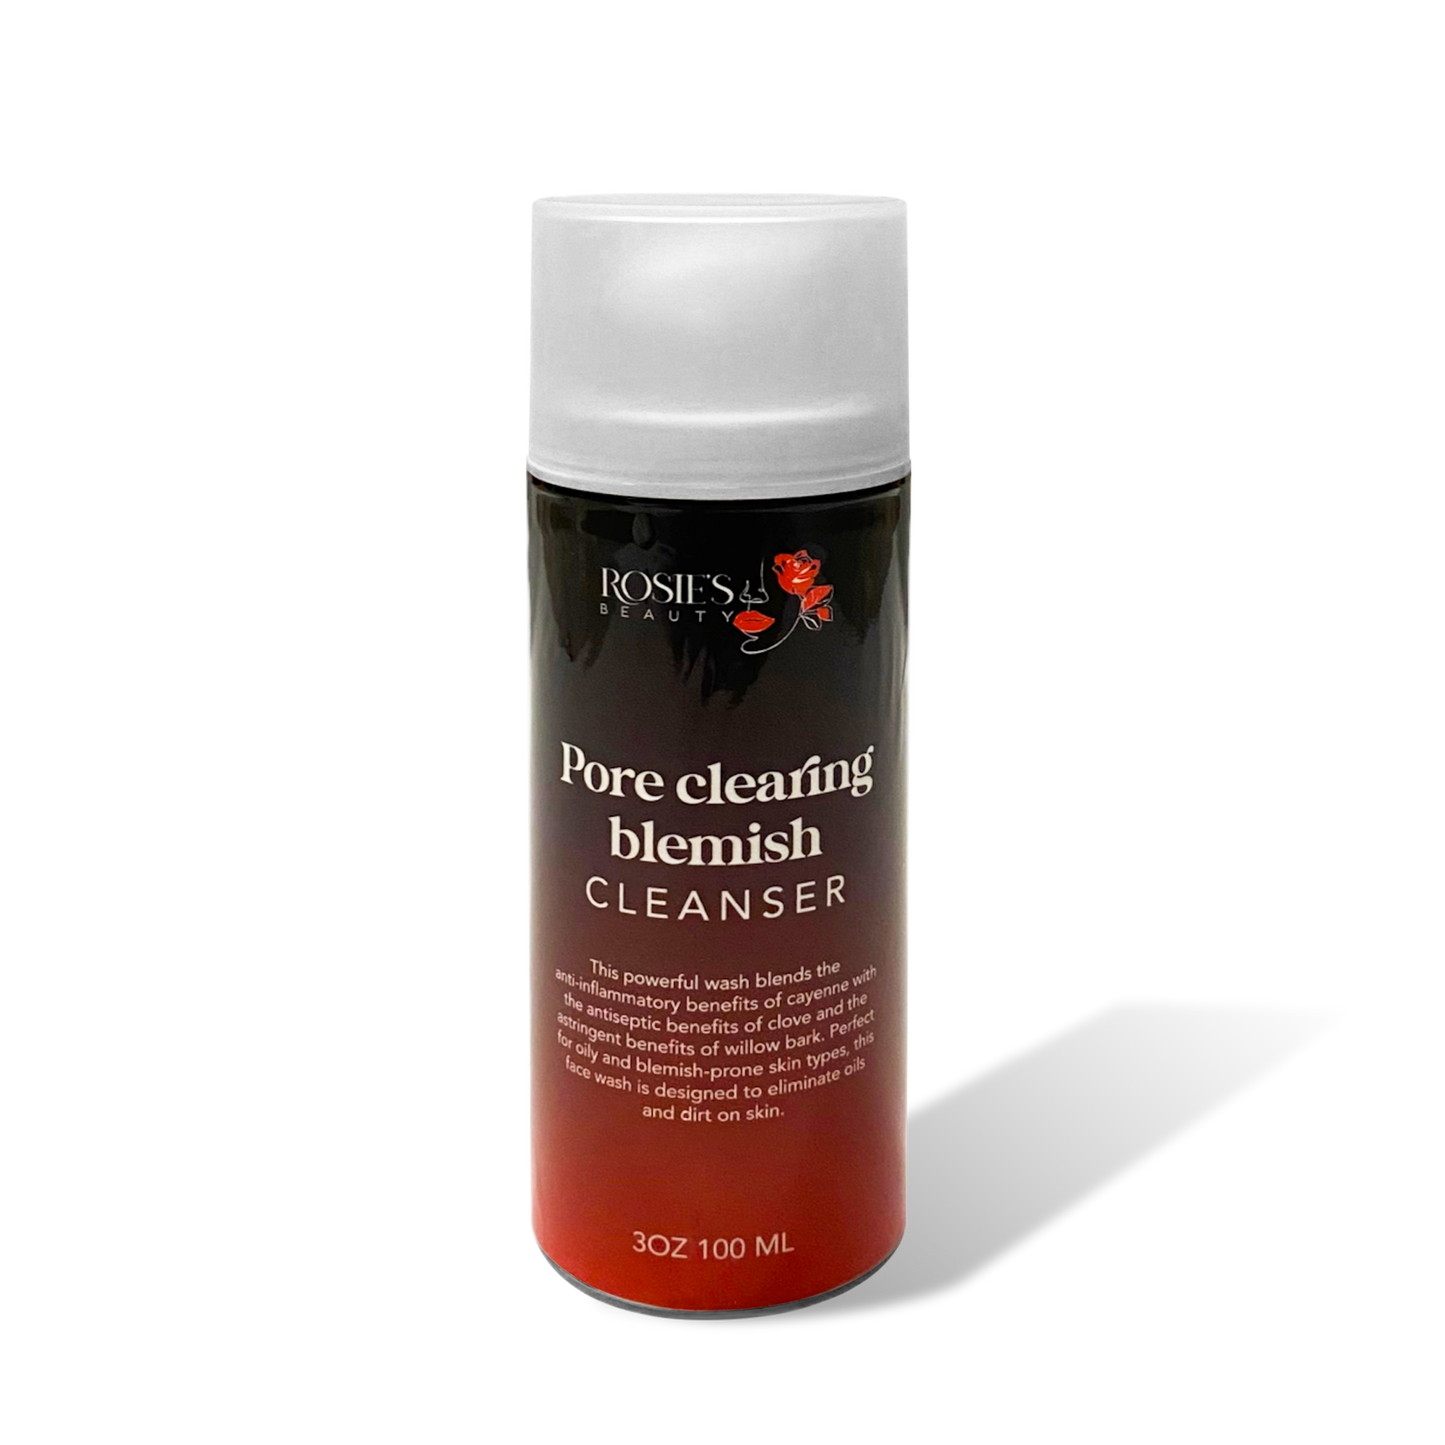 Pore clearing blemish cleanser